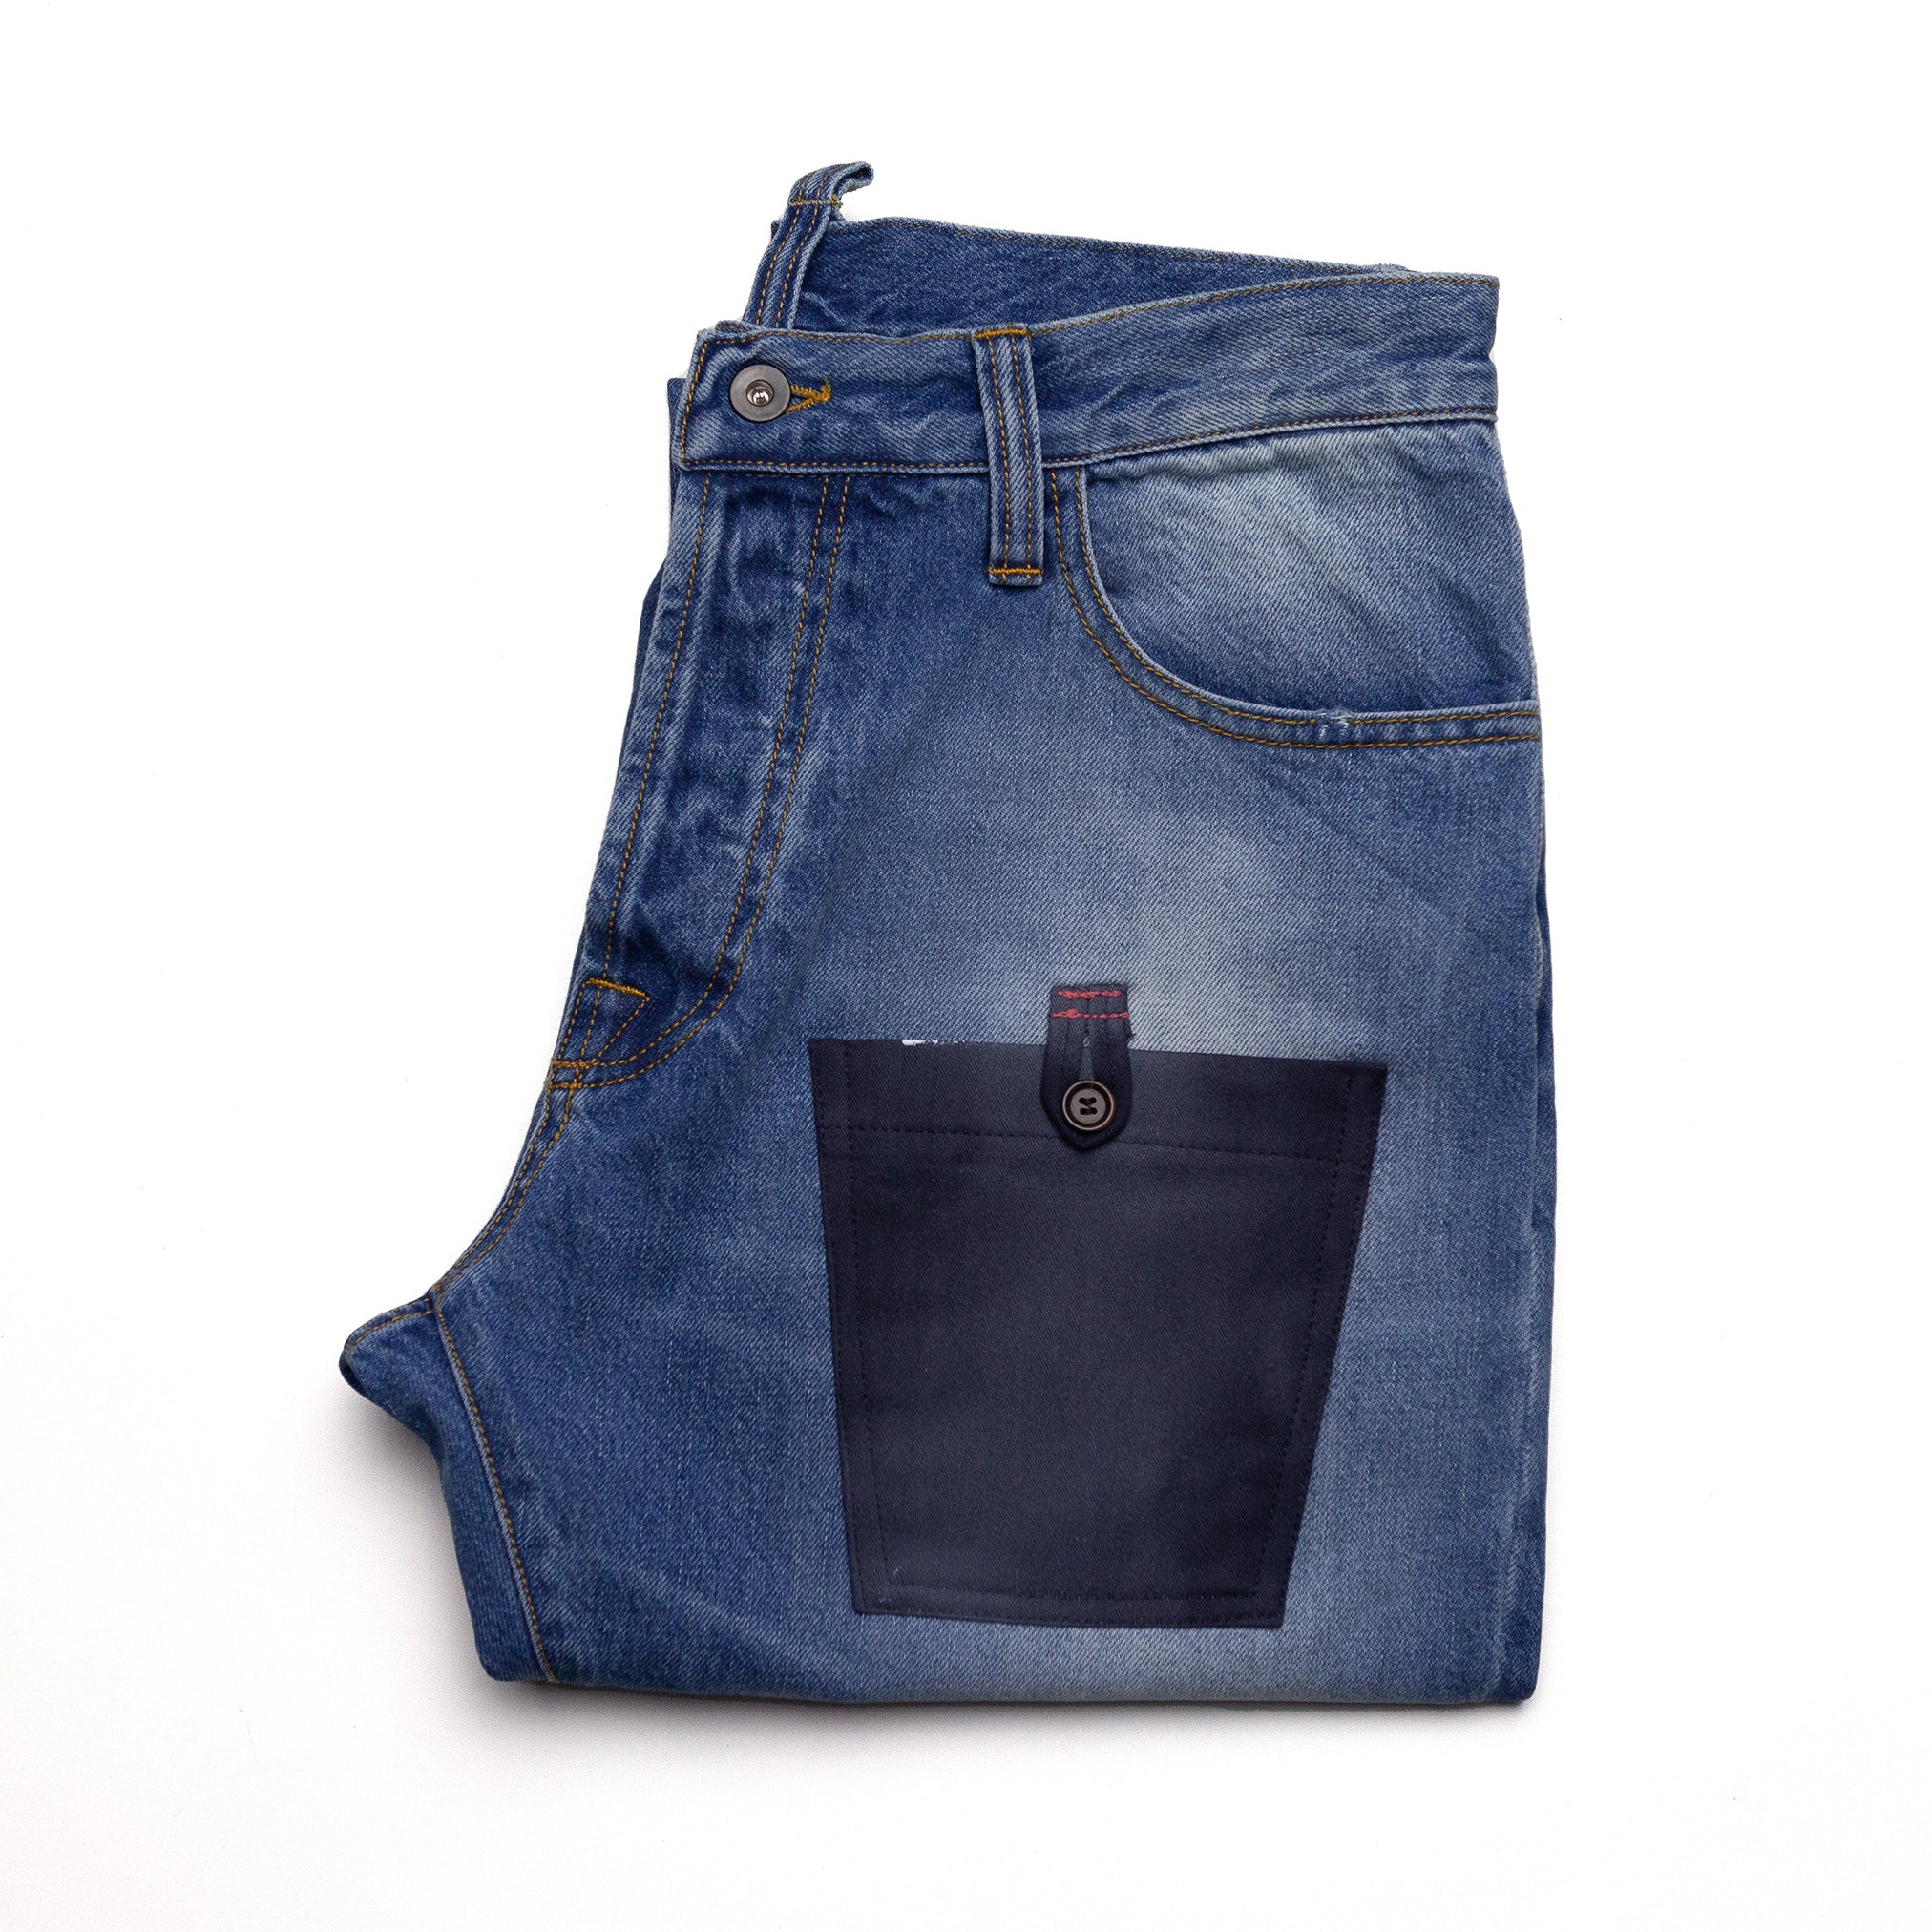 Jeans pants with back pocket Stock Photos and Images | agefotostock